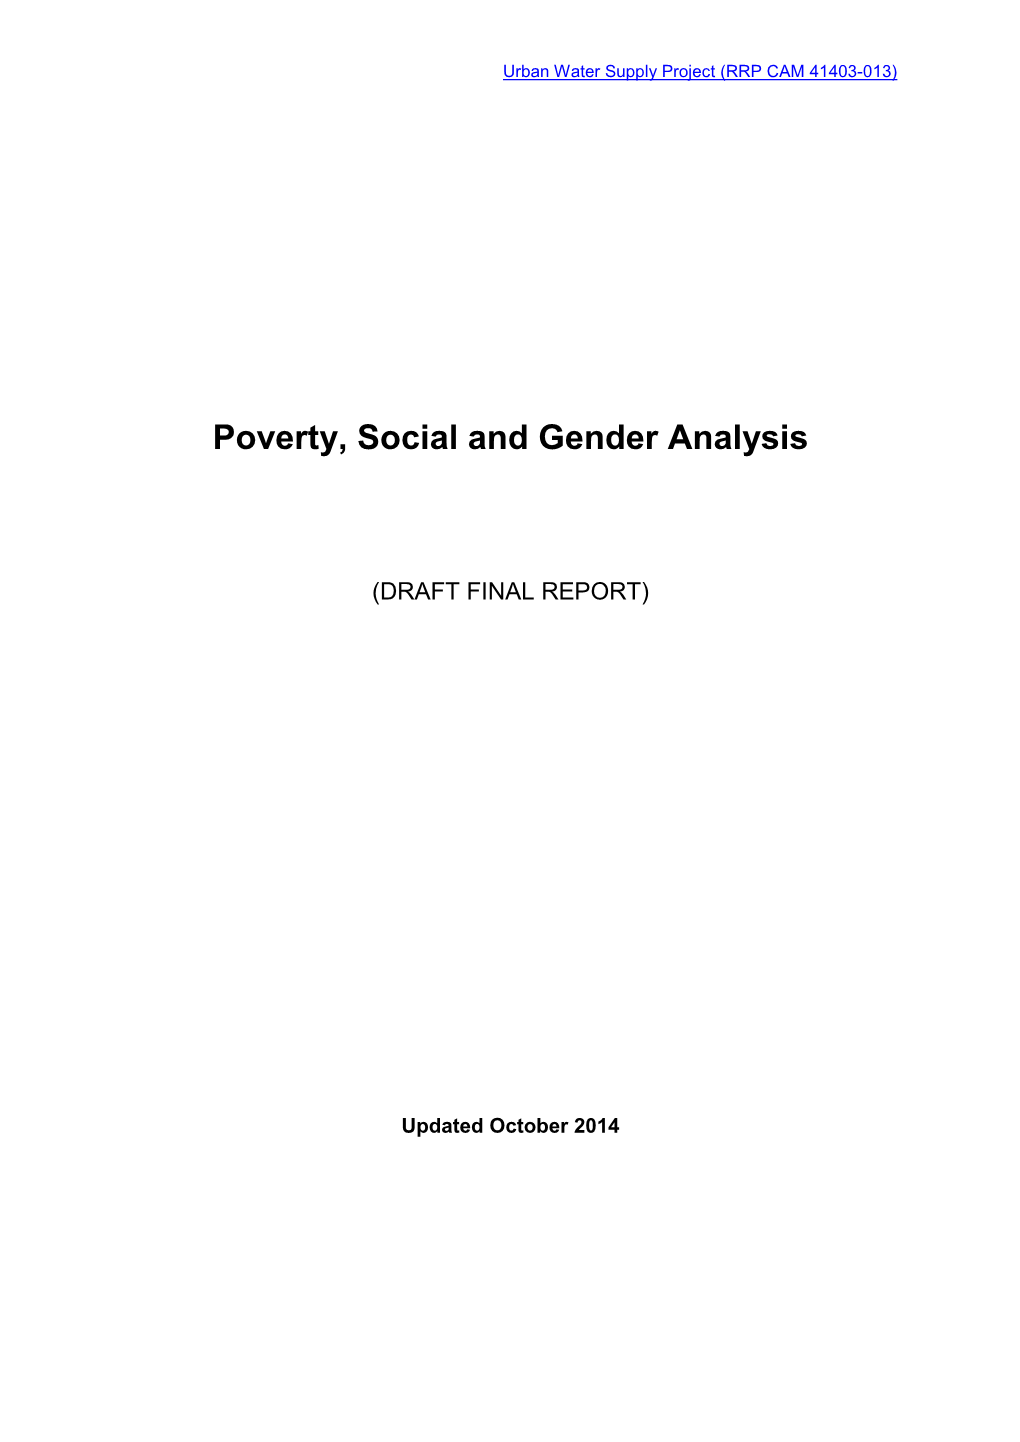 Poverty, Social and Gender Analysis